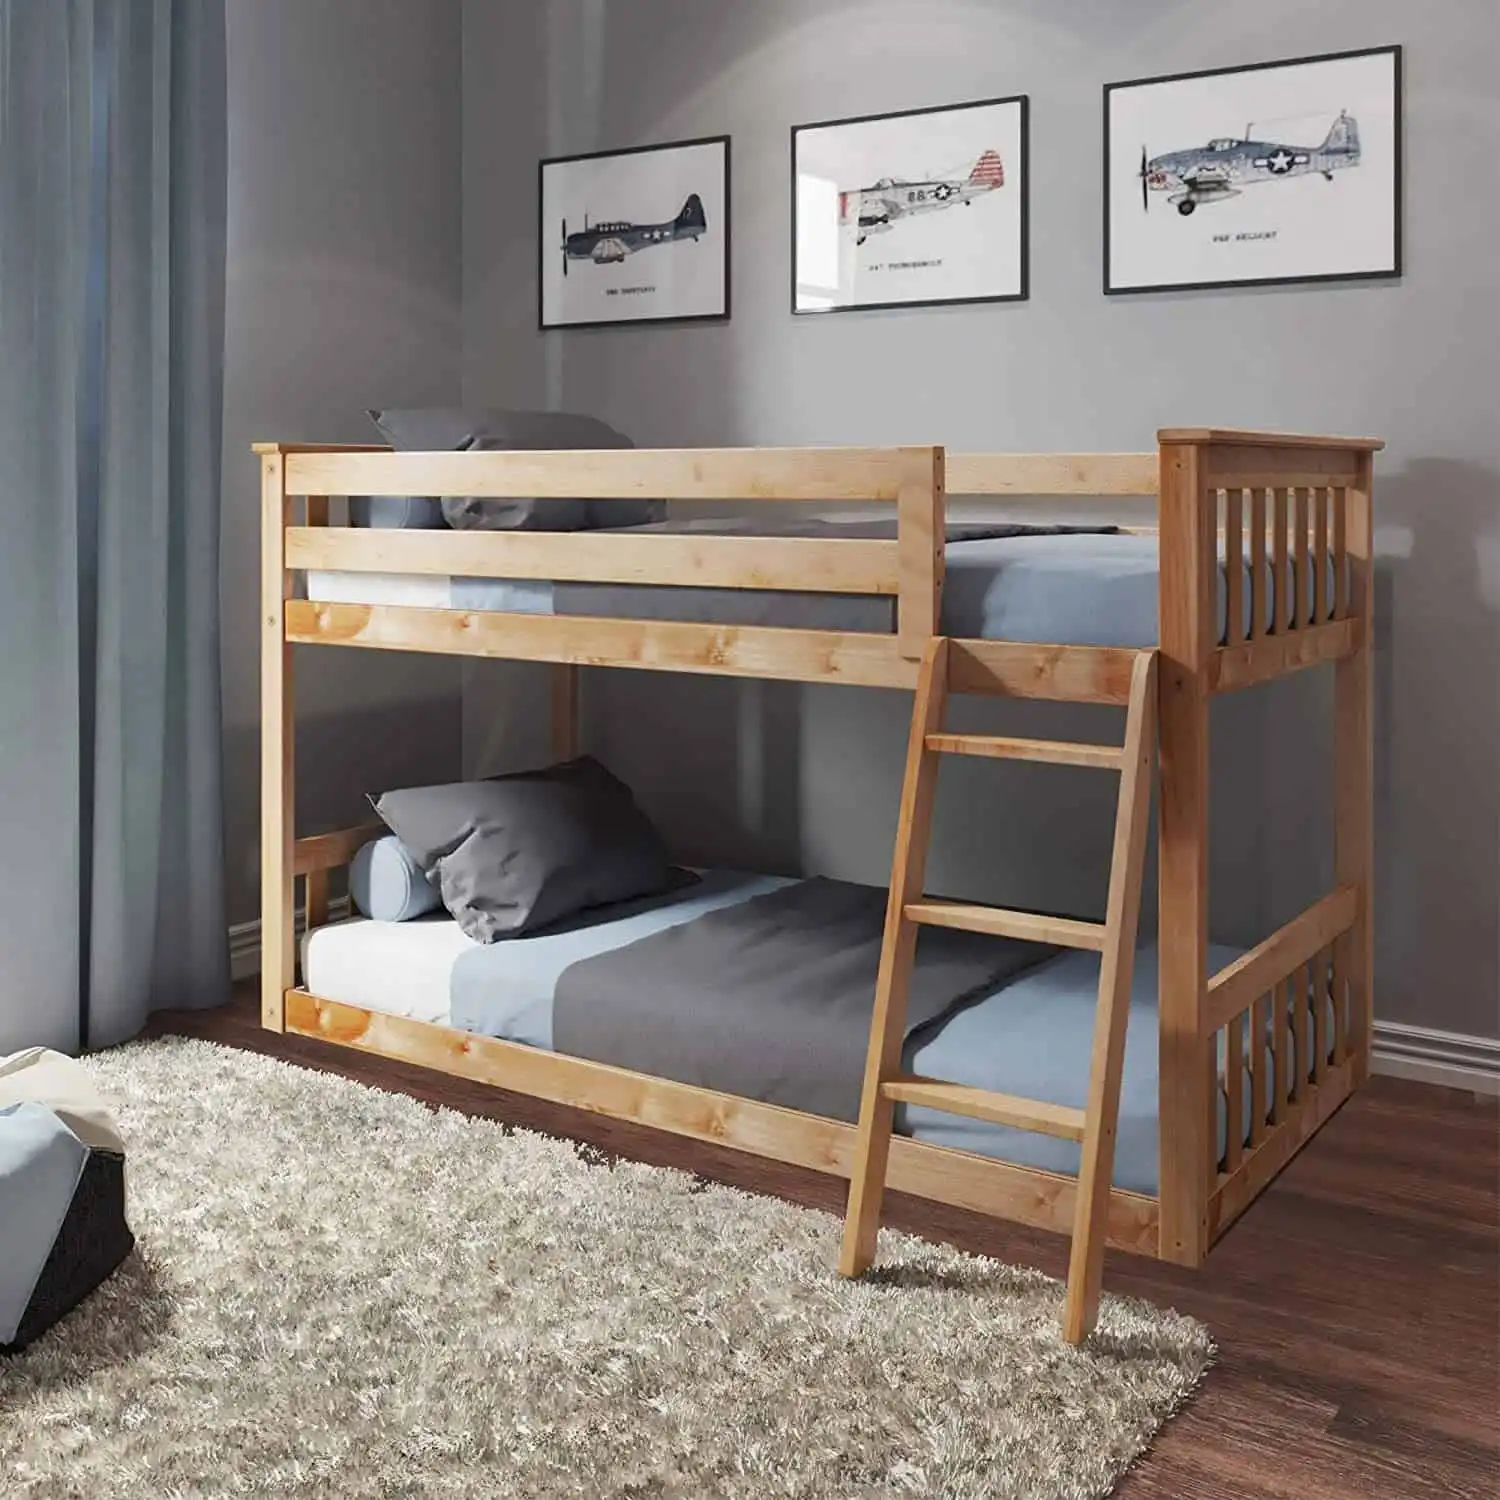 Max & Lily Bunk Bed